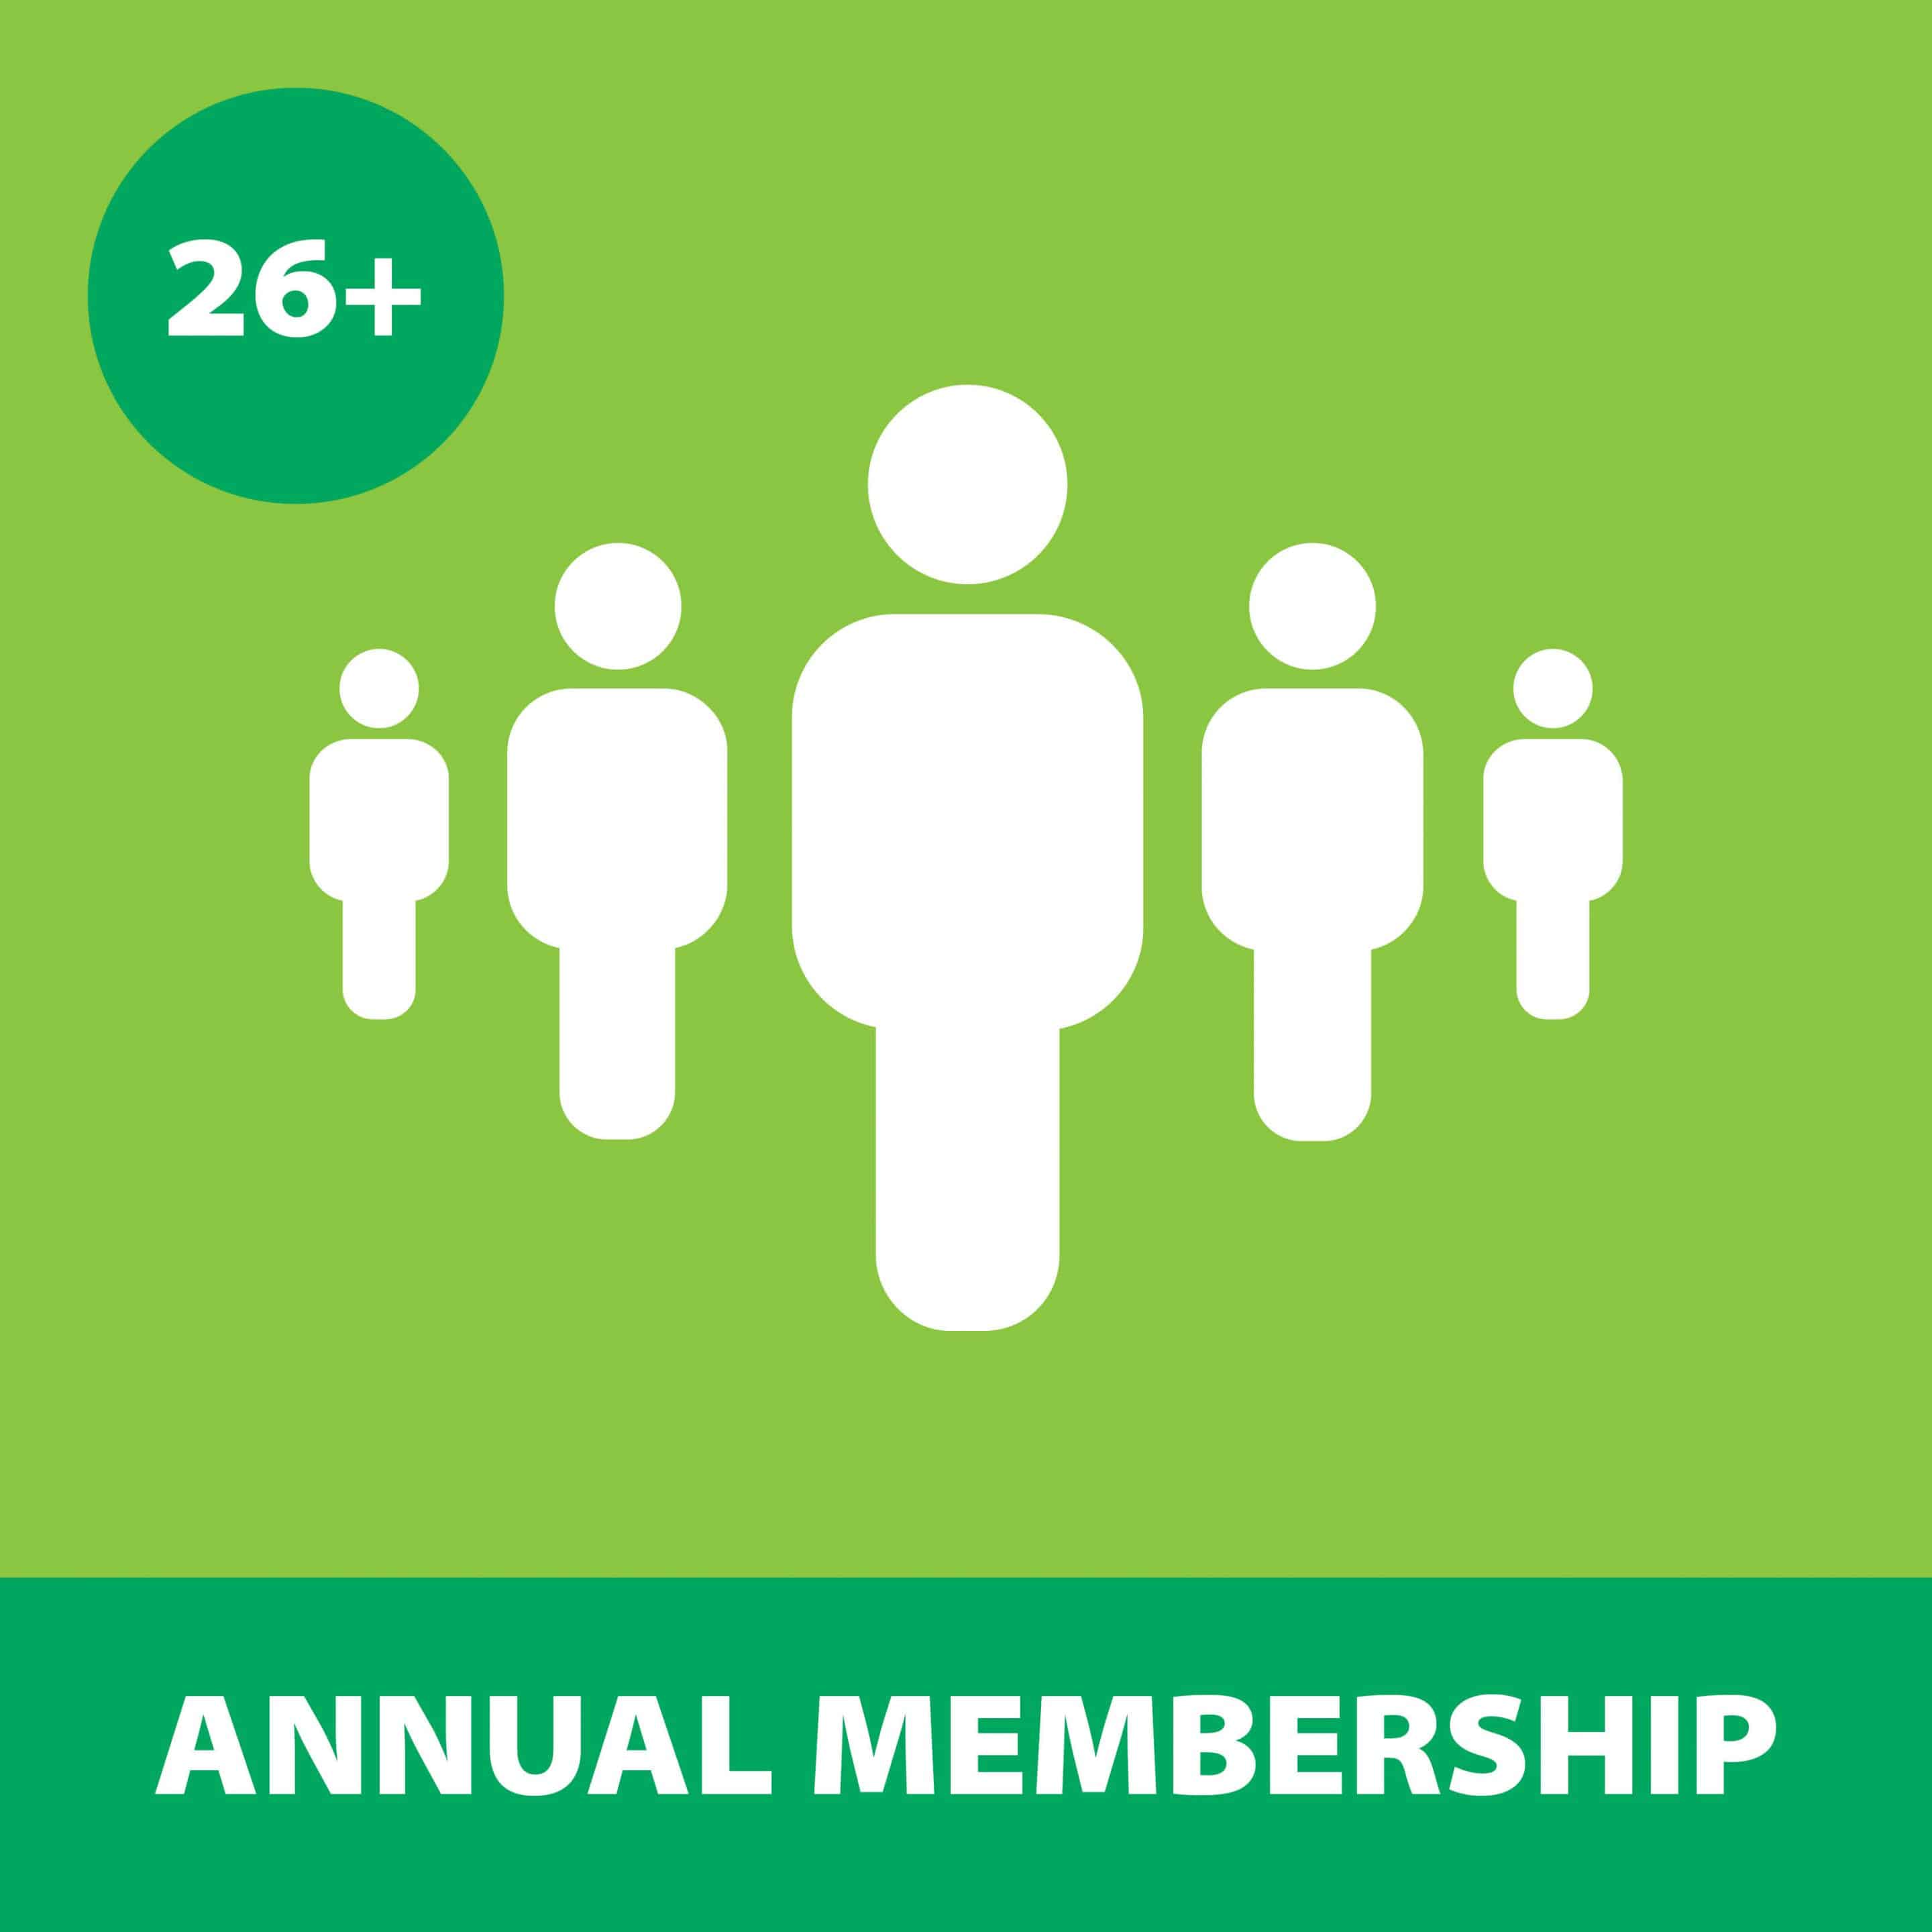 Corporate Membership (Organisations with 26+ Employees – Annual)